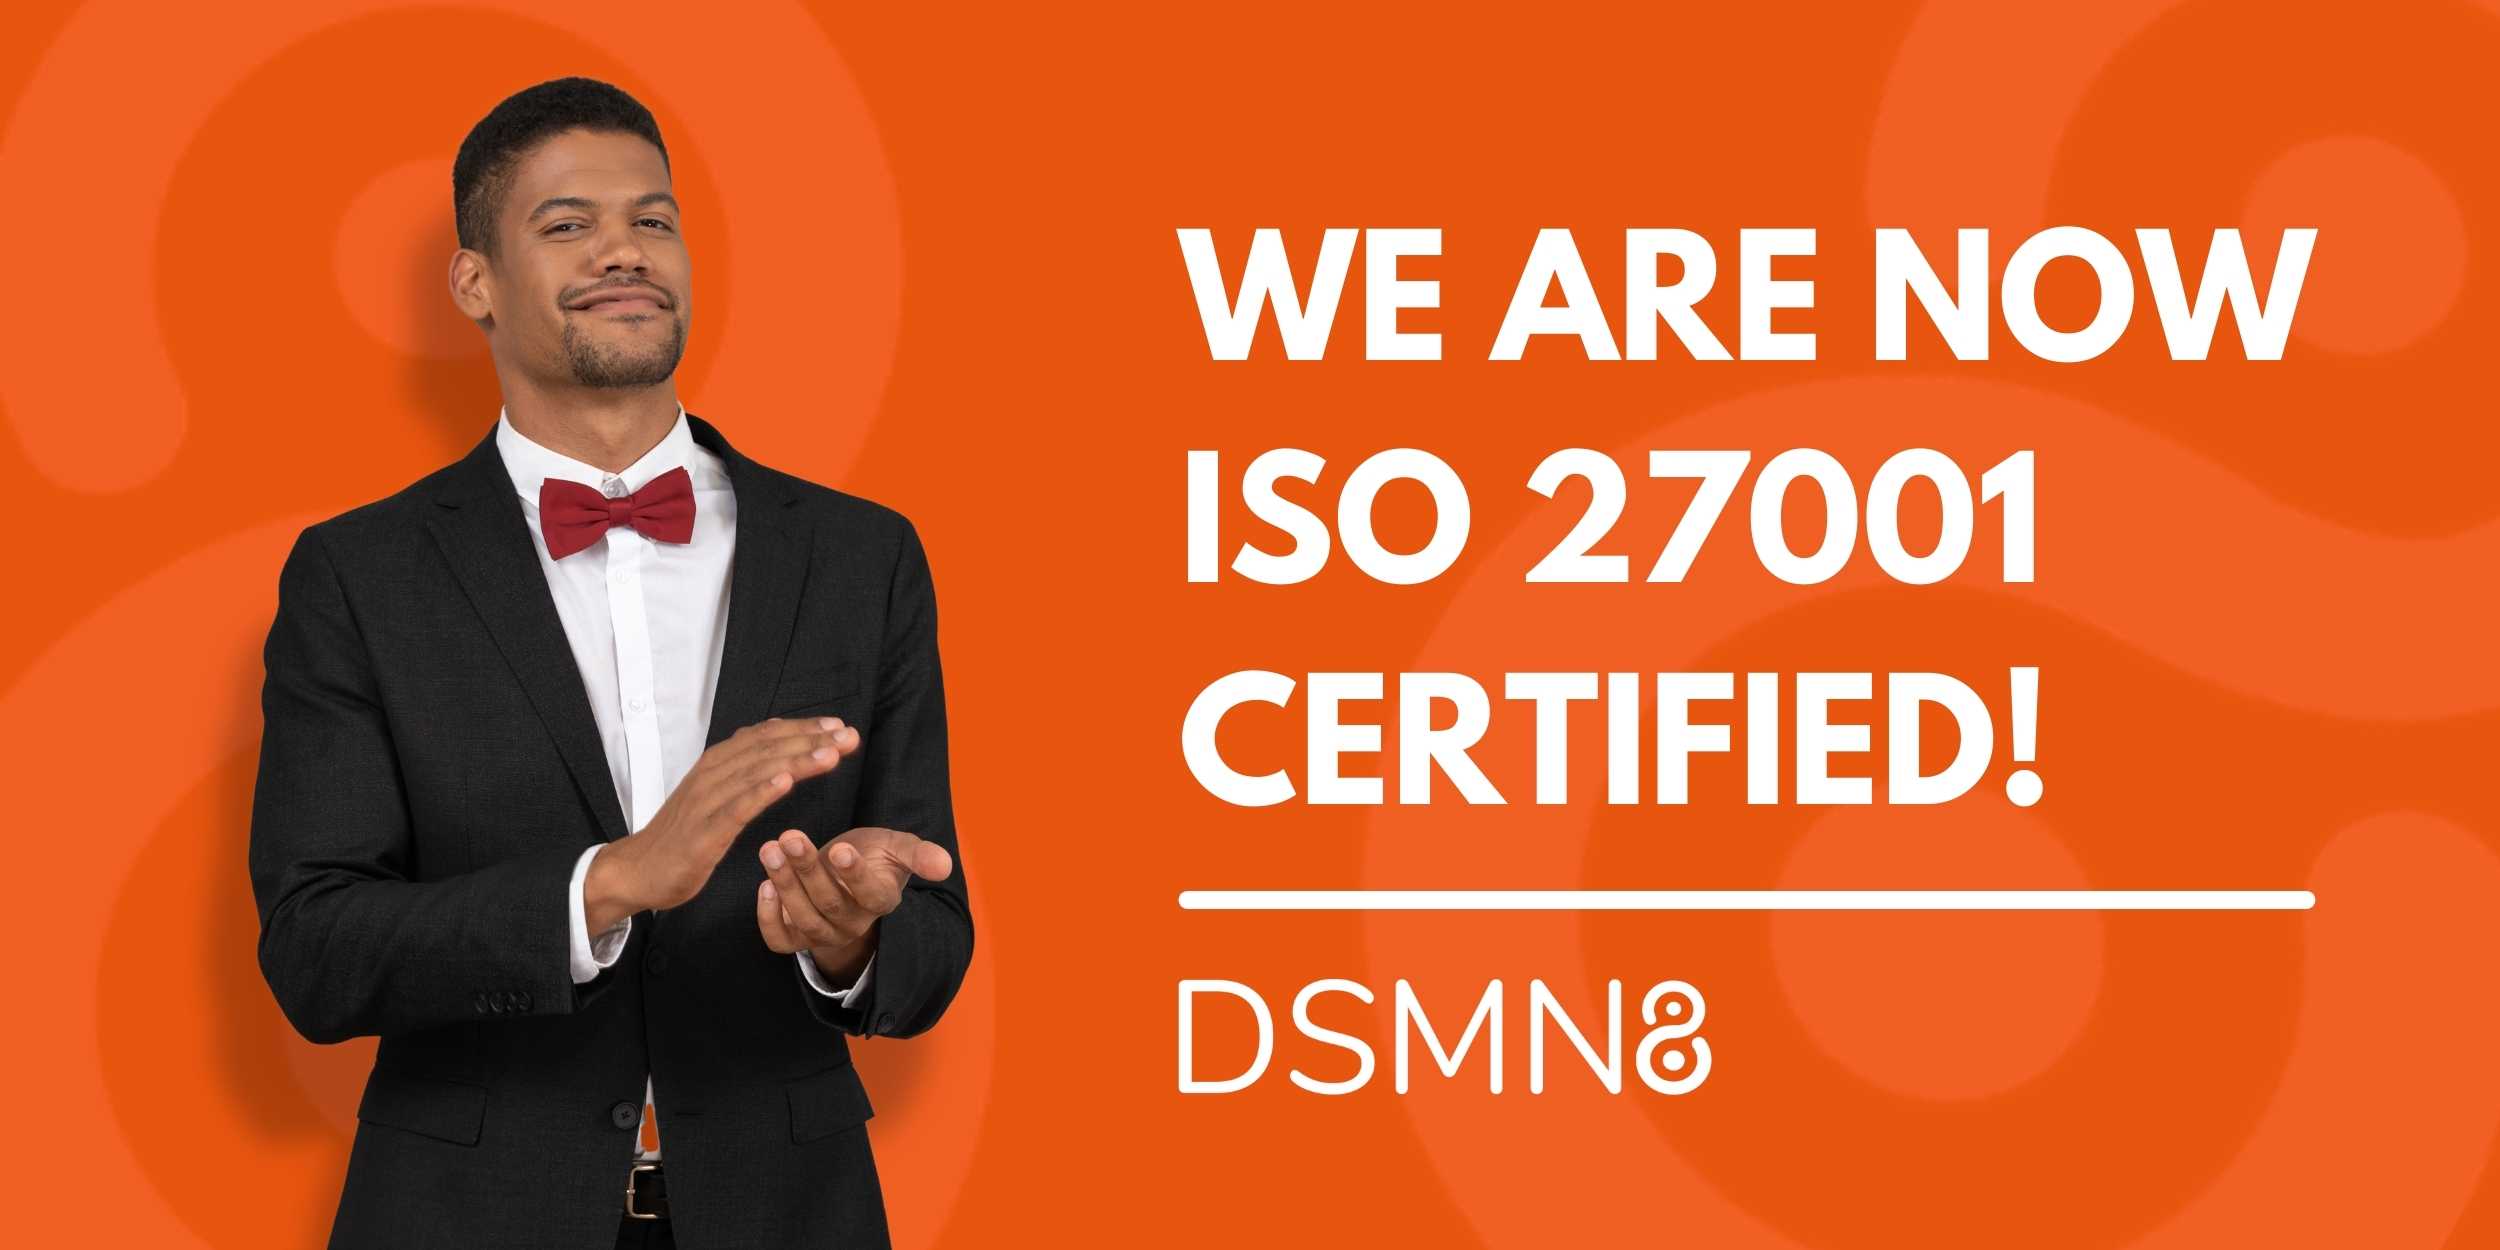 DSMN8 is Officially ISO 27001 Certified